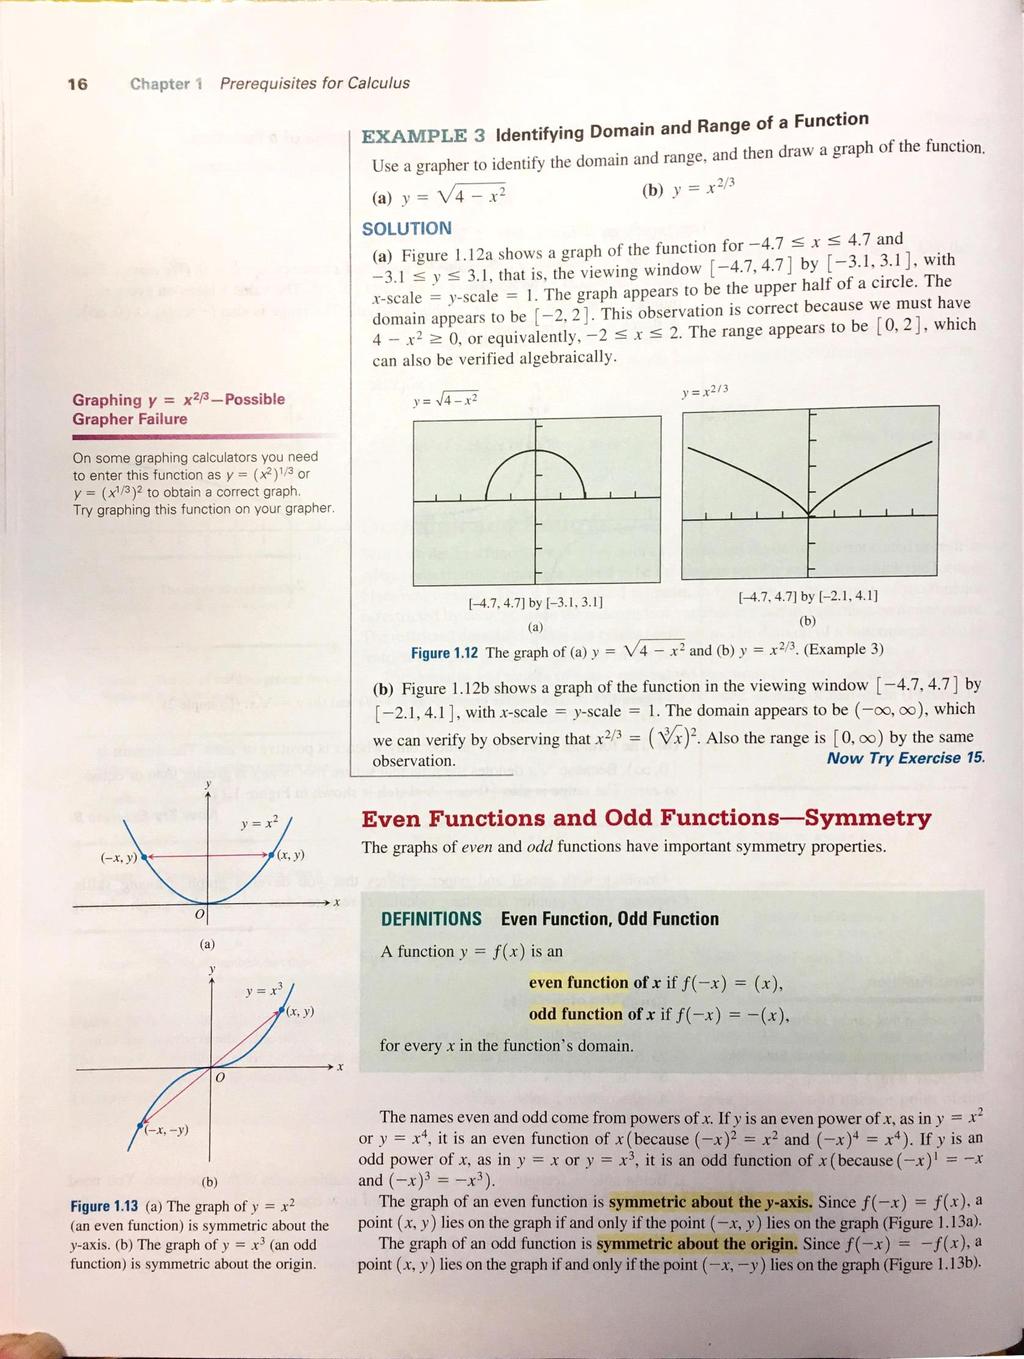 6 Chapter Prerequisites for Calculus EXAMPLE 3 Identifying Domain and Range of a Function Use a grapher to identify the domain and range, and then draw a graph of the function.